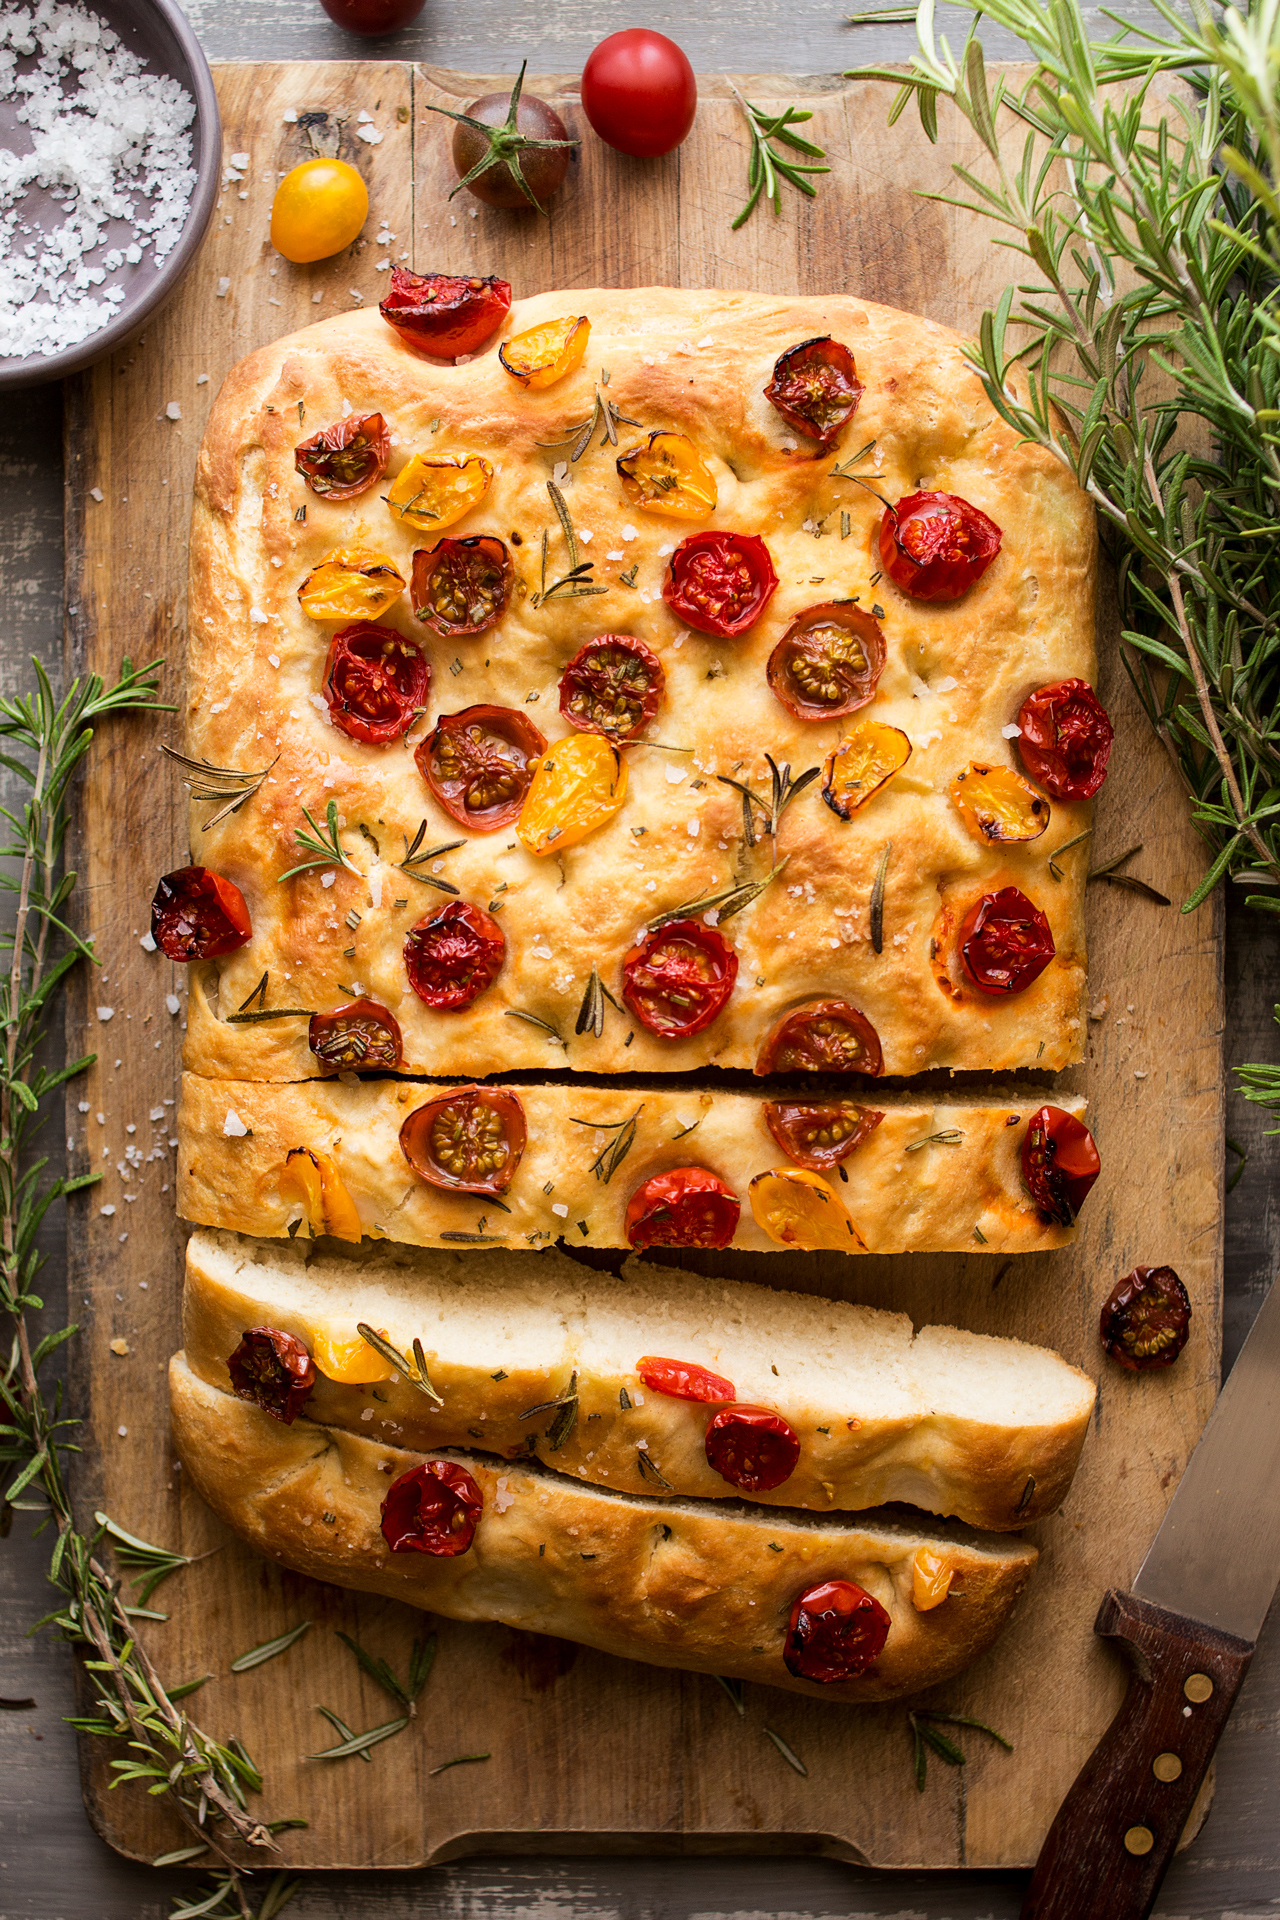 Vegan focaccia with tomatoes and rosemary - Lazy Cat Kitchen